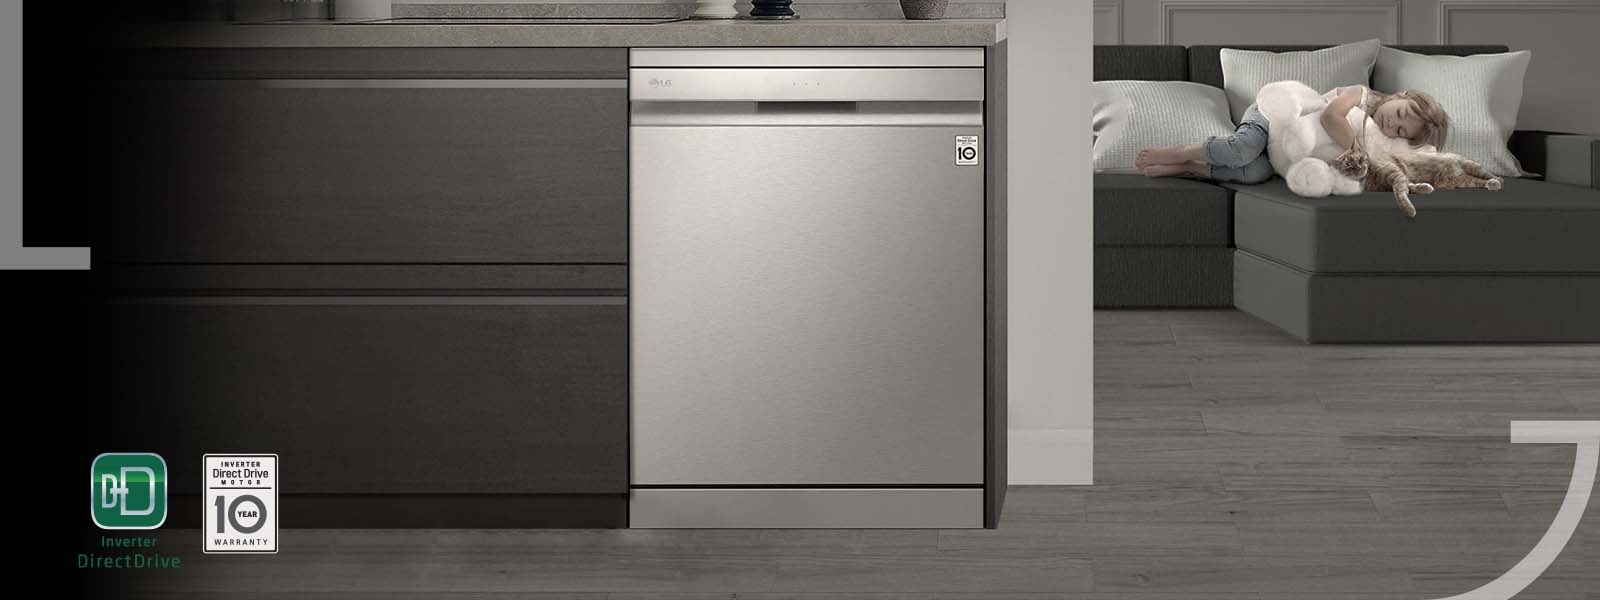 Why You Should Have an LG Dishwasher in your Kitchen